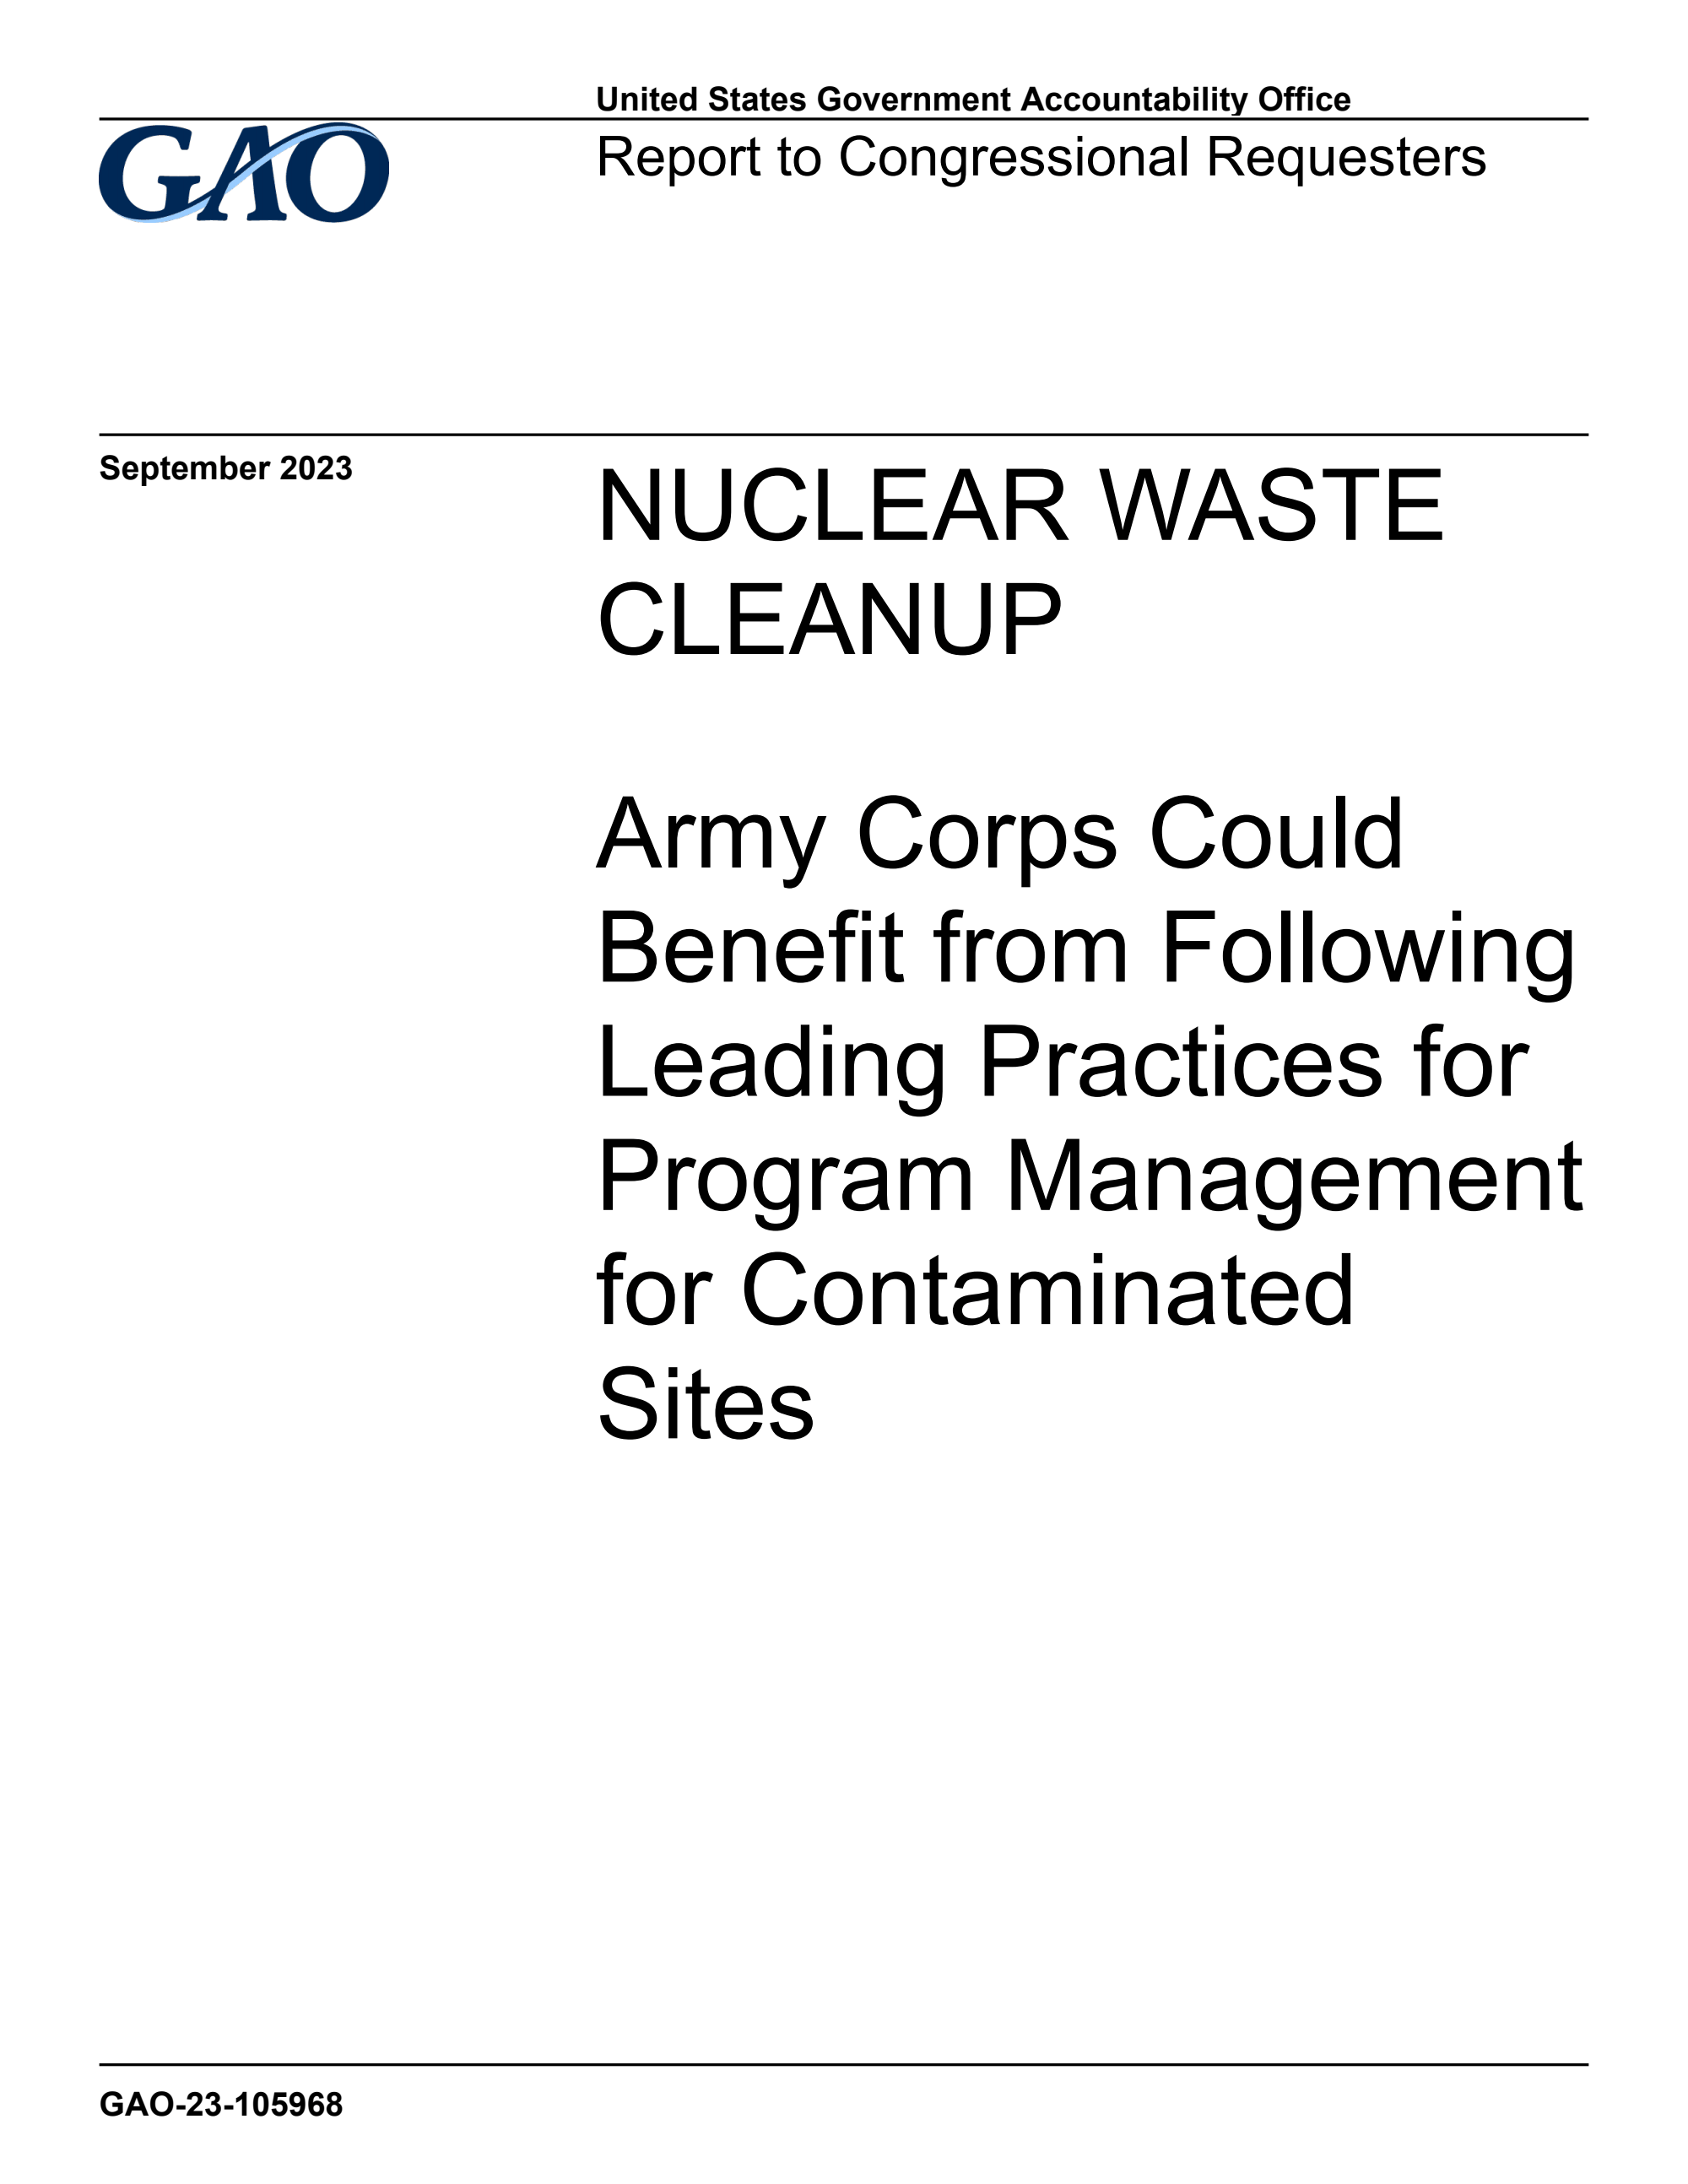 Page 1 of GAO report Nuclear Waste Cleanup September 2023